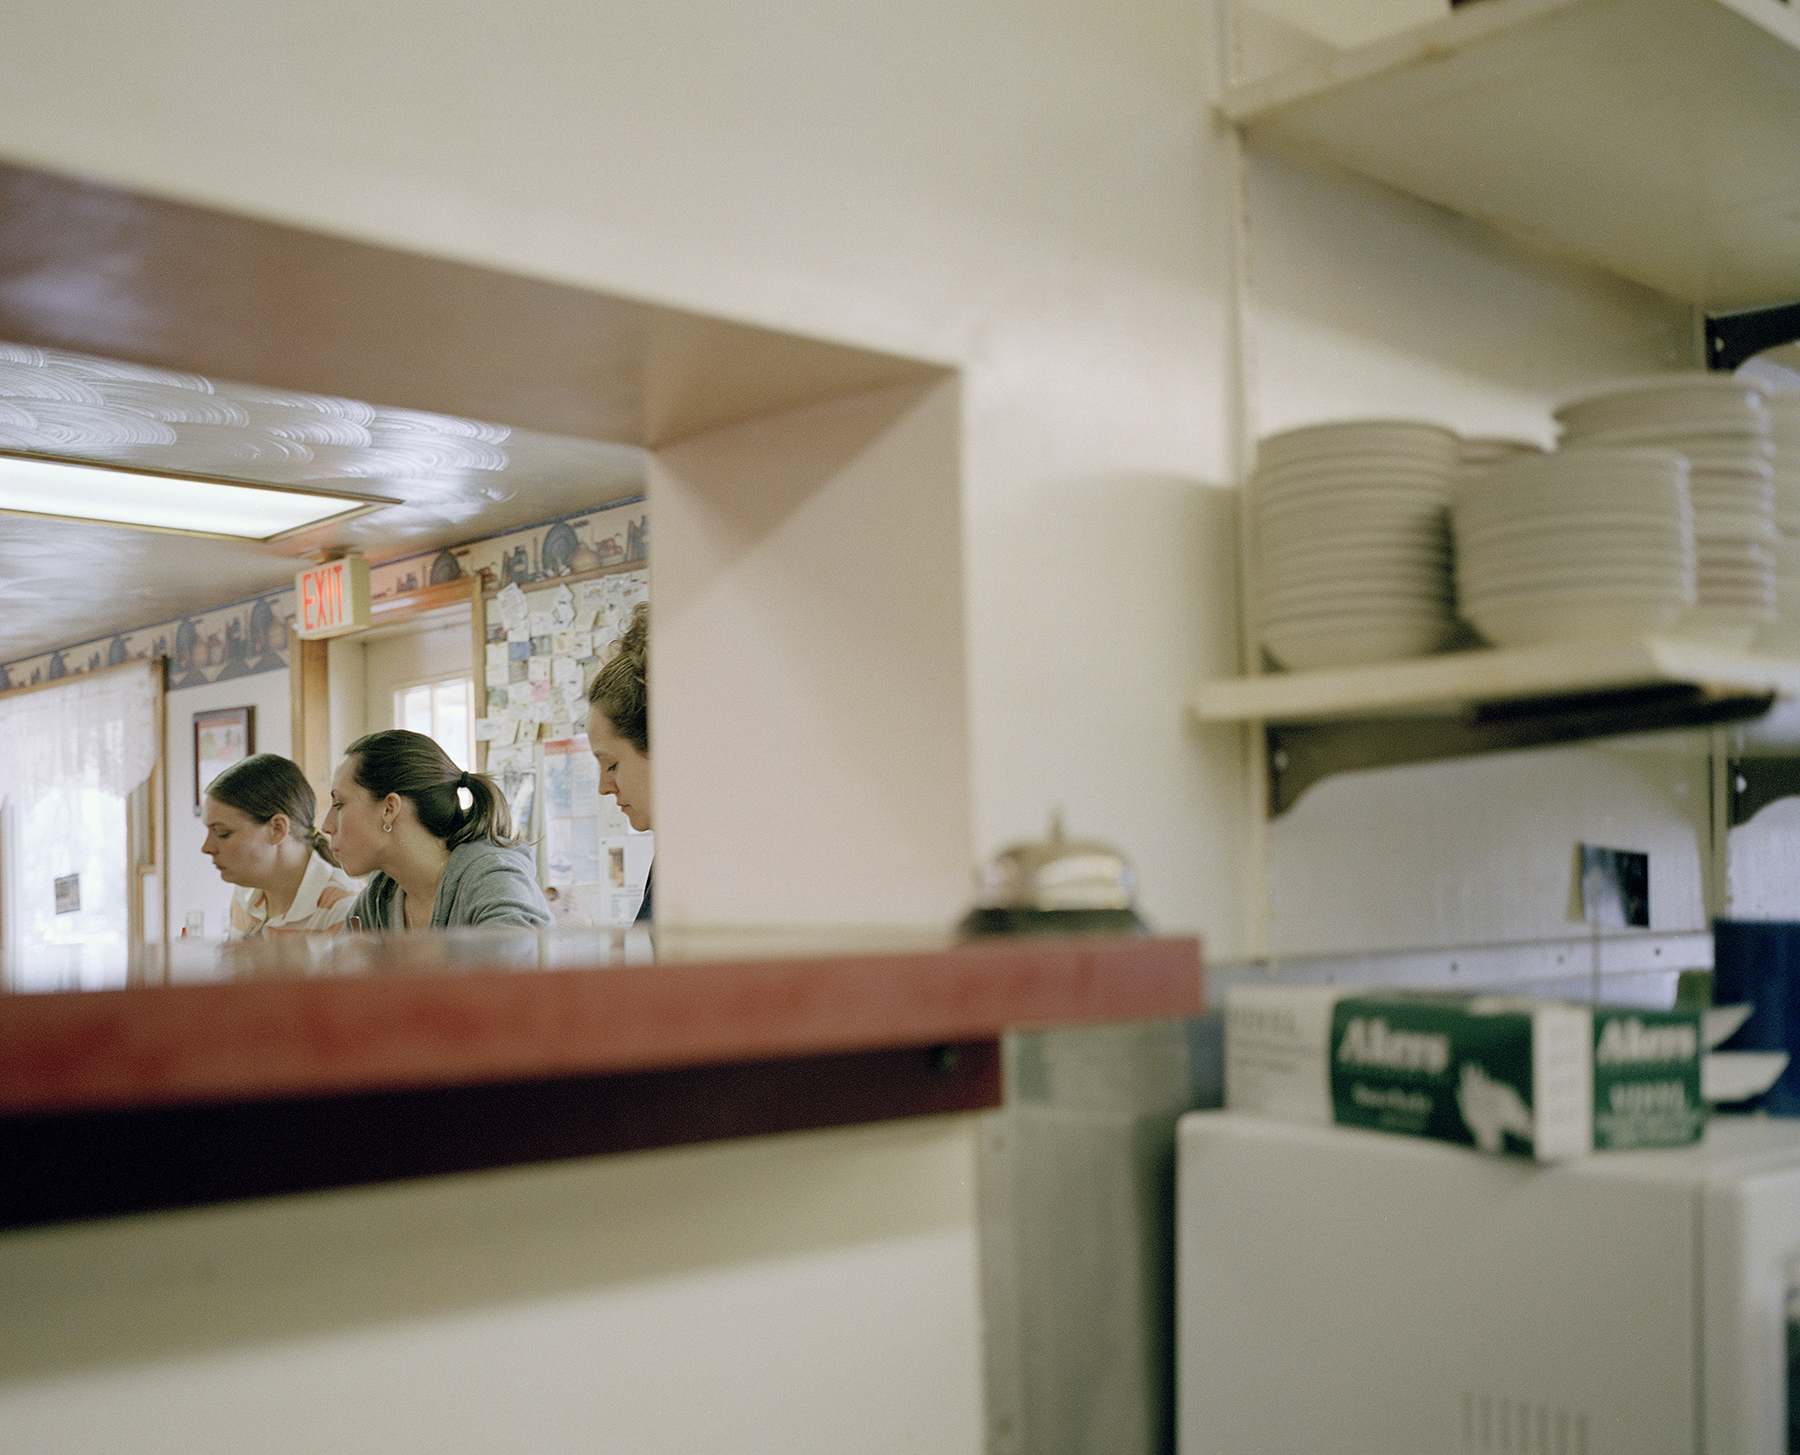    Jennifer, Chrissy and Terry, Pam’s Diner, Cleveland, NY.   , 2007    Ink jet print, edition of 5 + 2AP    9.5 x 11.75 inches  